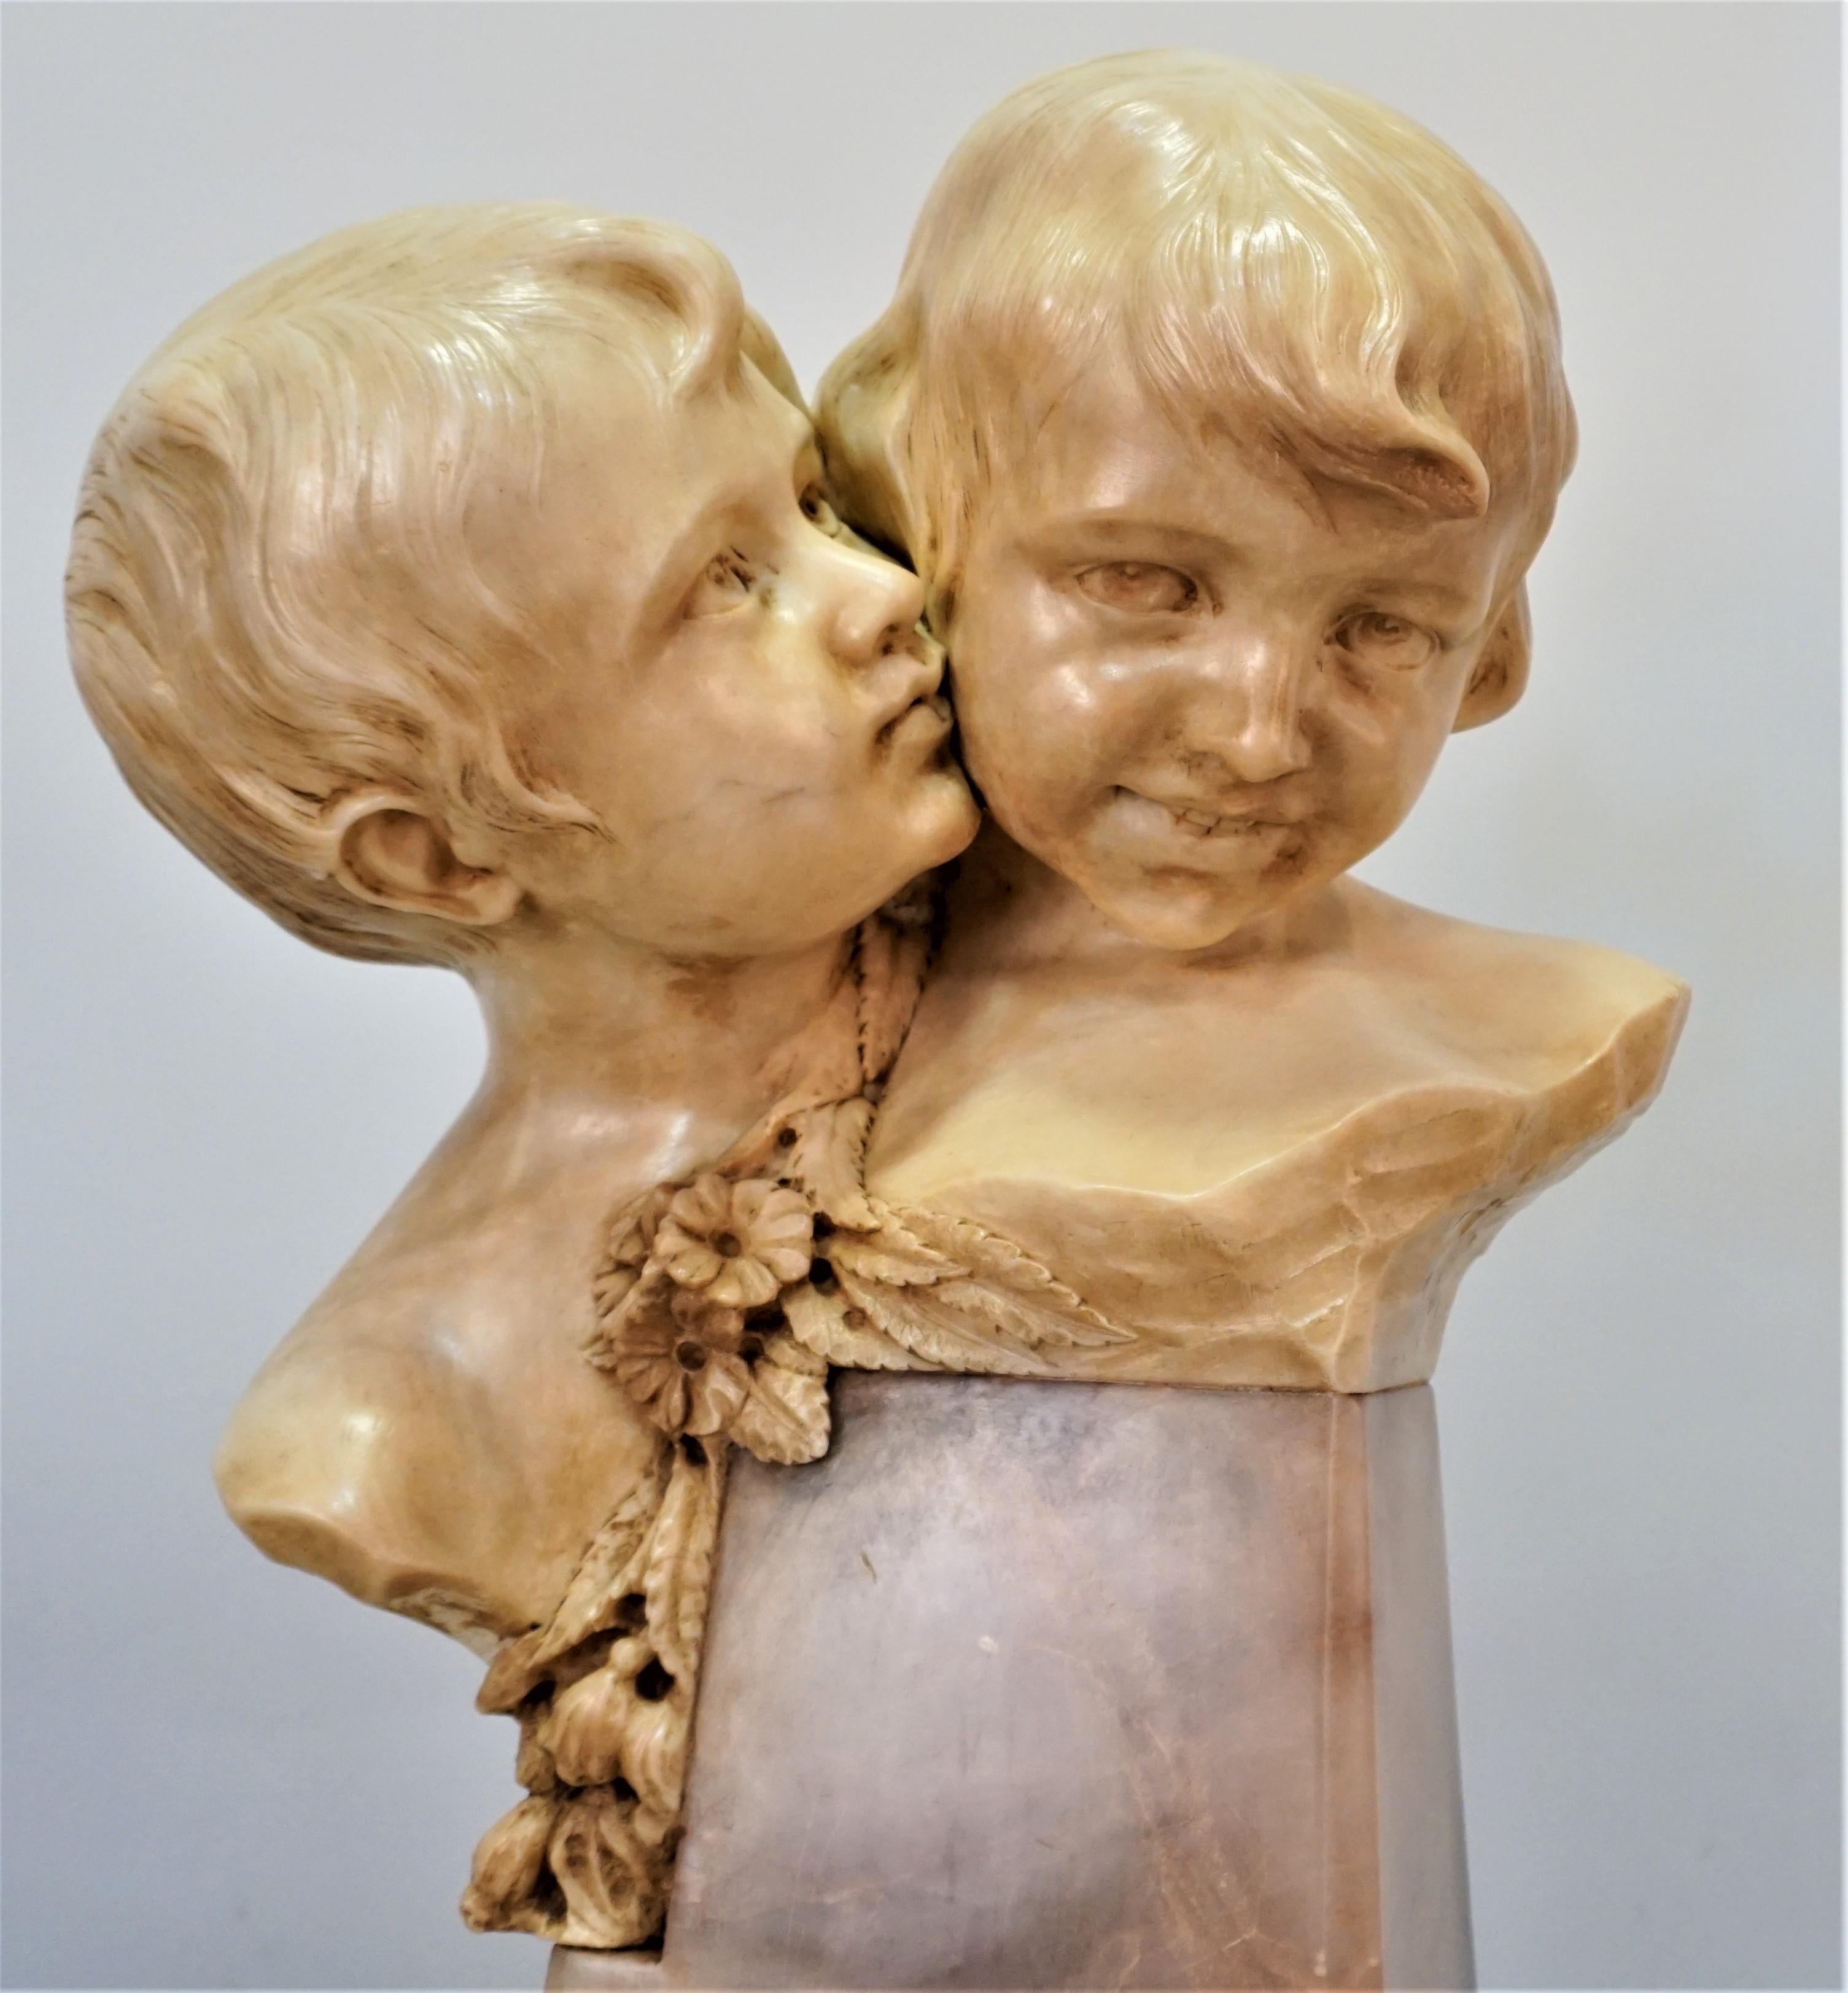 Sculpture young boy and girl highly detailed carving with lovely realistic pretty faces.